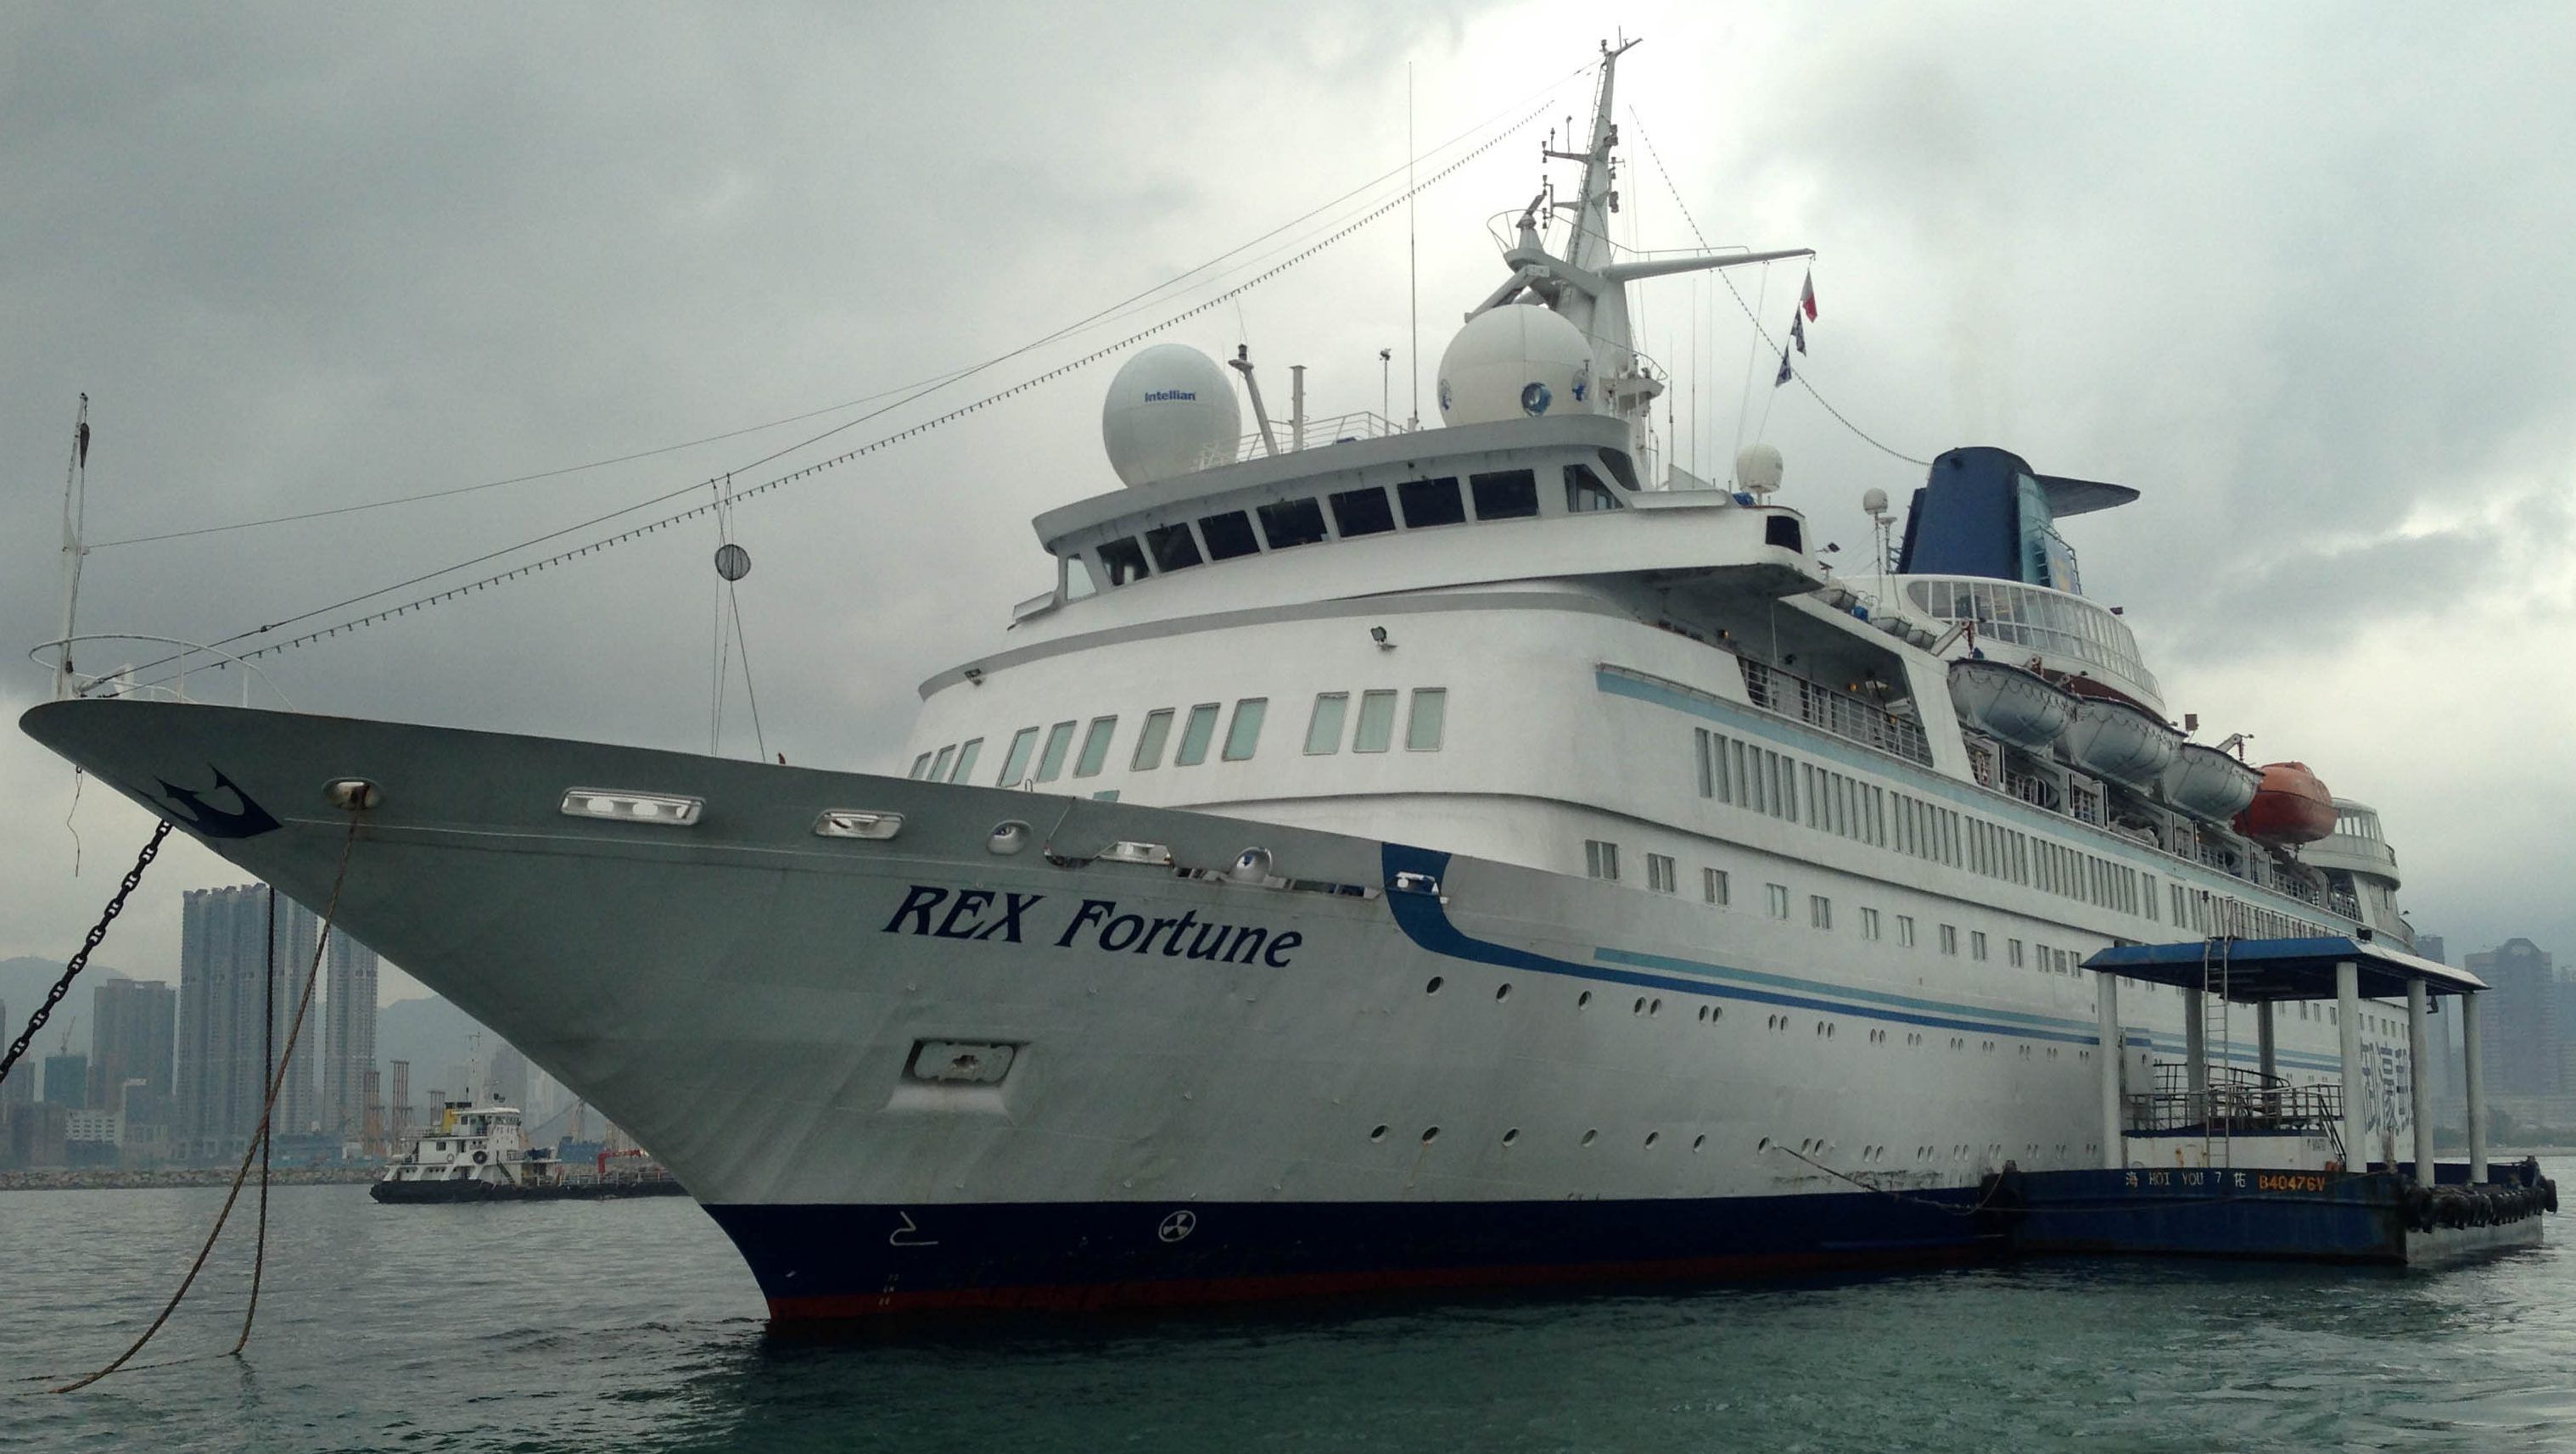 16 hours on one of Hong Kong's overnight casino cruise boats — Quartz